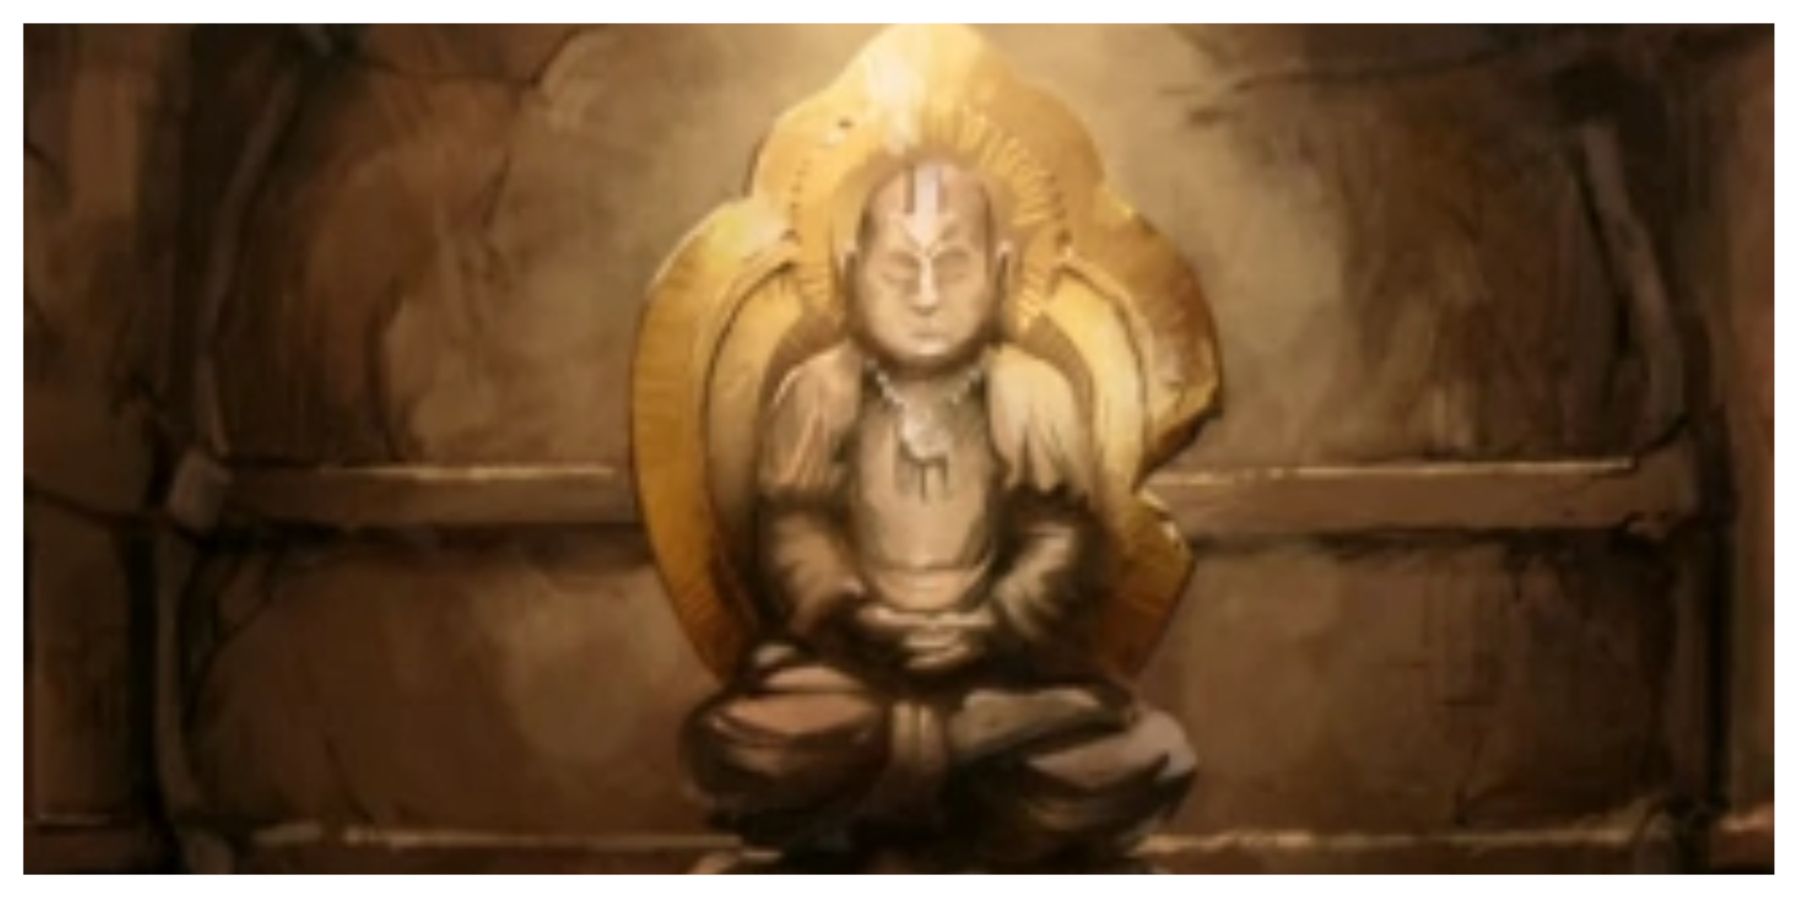 A Statue Of Monk Laghima in The Legend of Korra